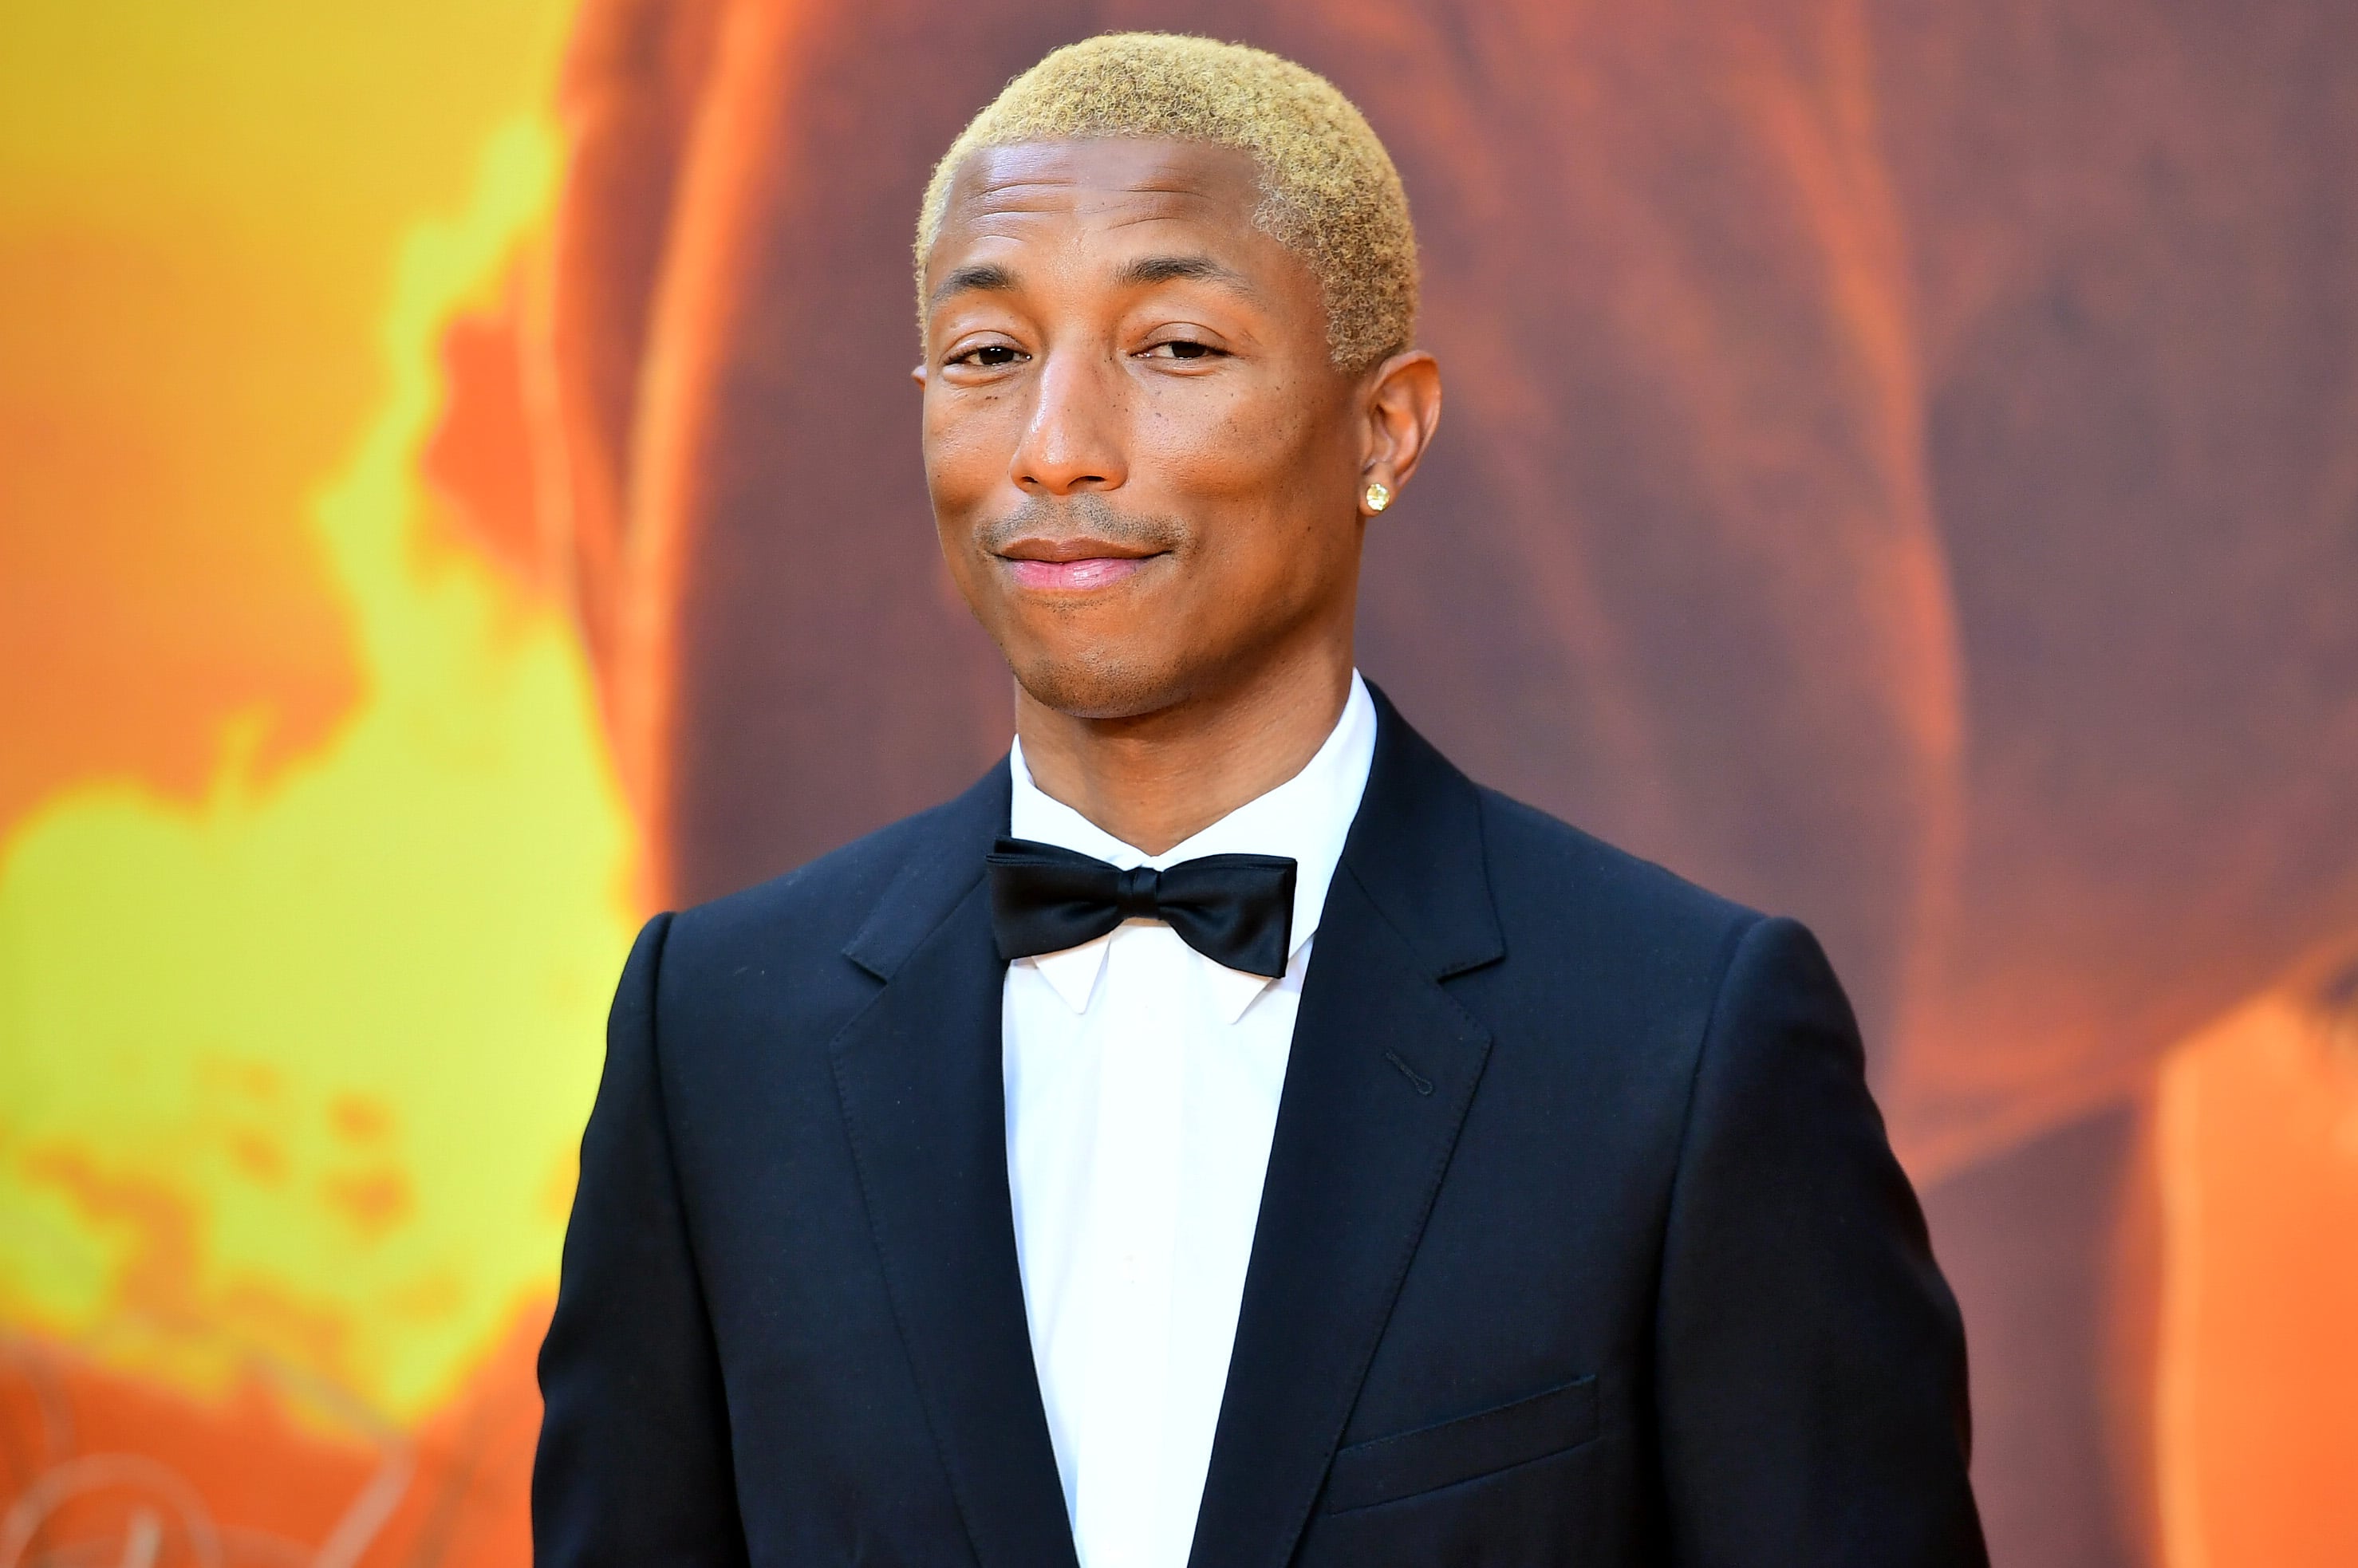 The Lion King: Pharrell Williams joined by his wife Helen Lasichanh at  London premiere